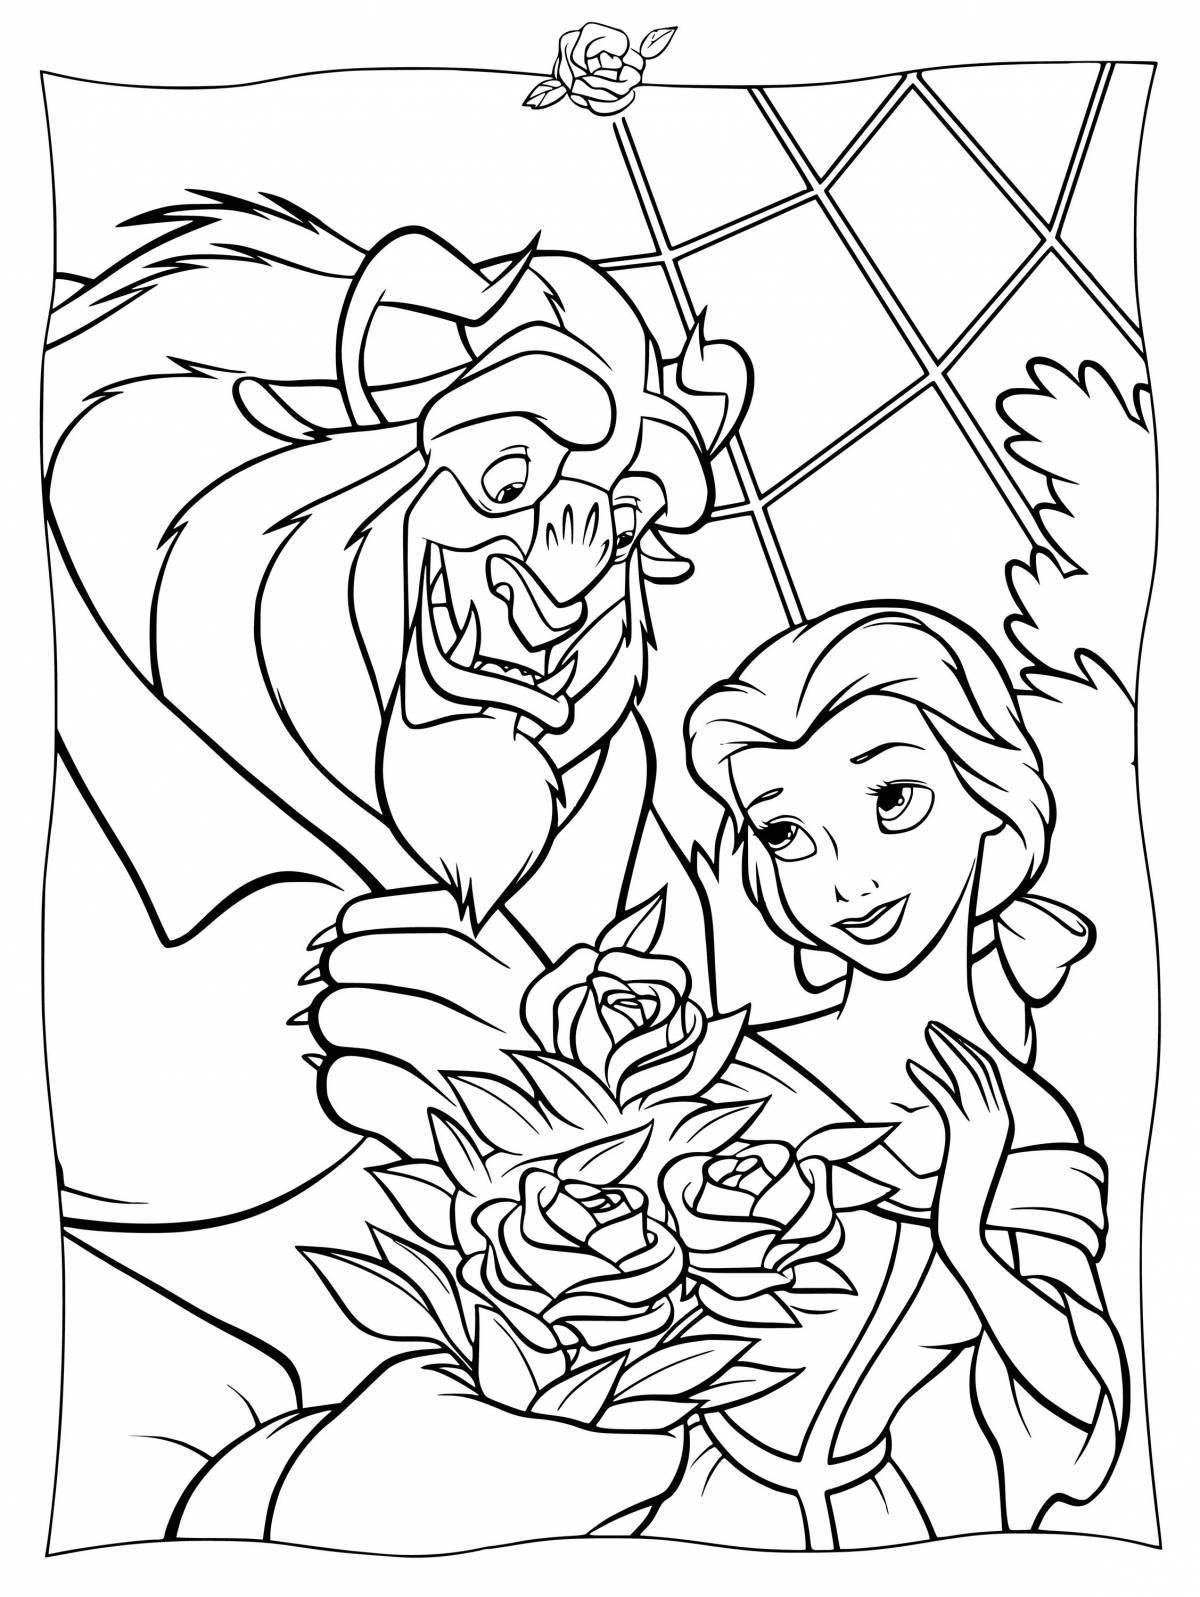 Glorious belle and the monster coloring page